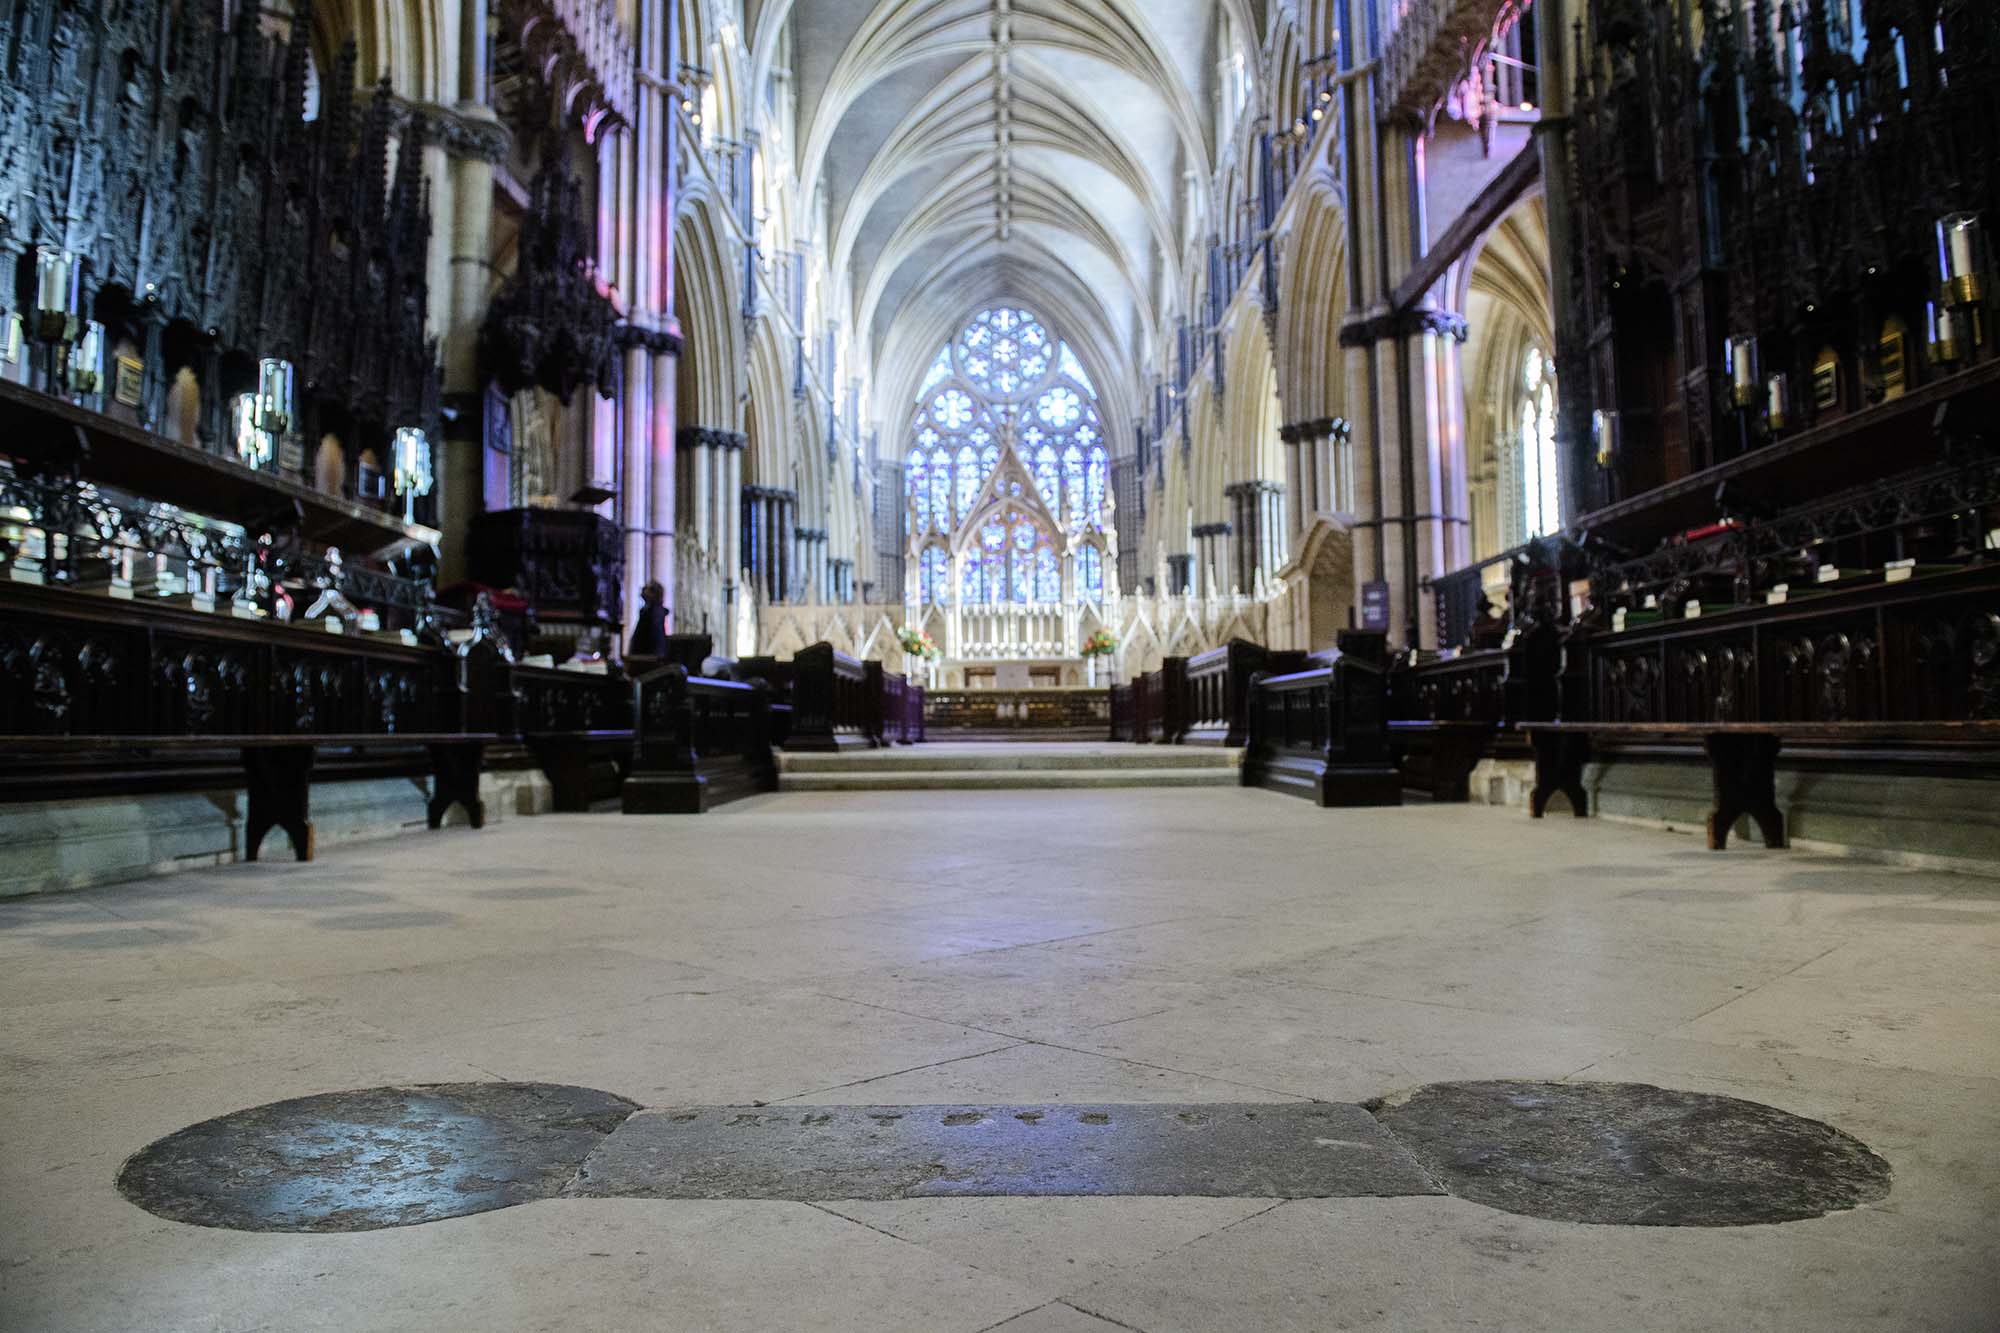 'The Bone' - the most acoustically perfect spot in the Cathedral